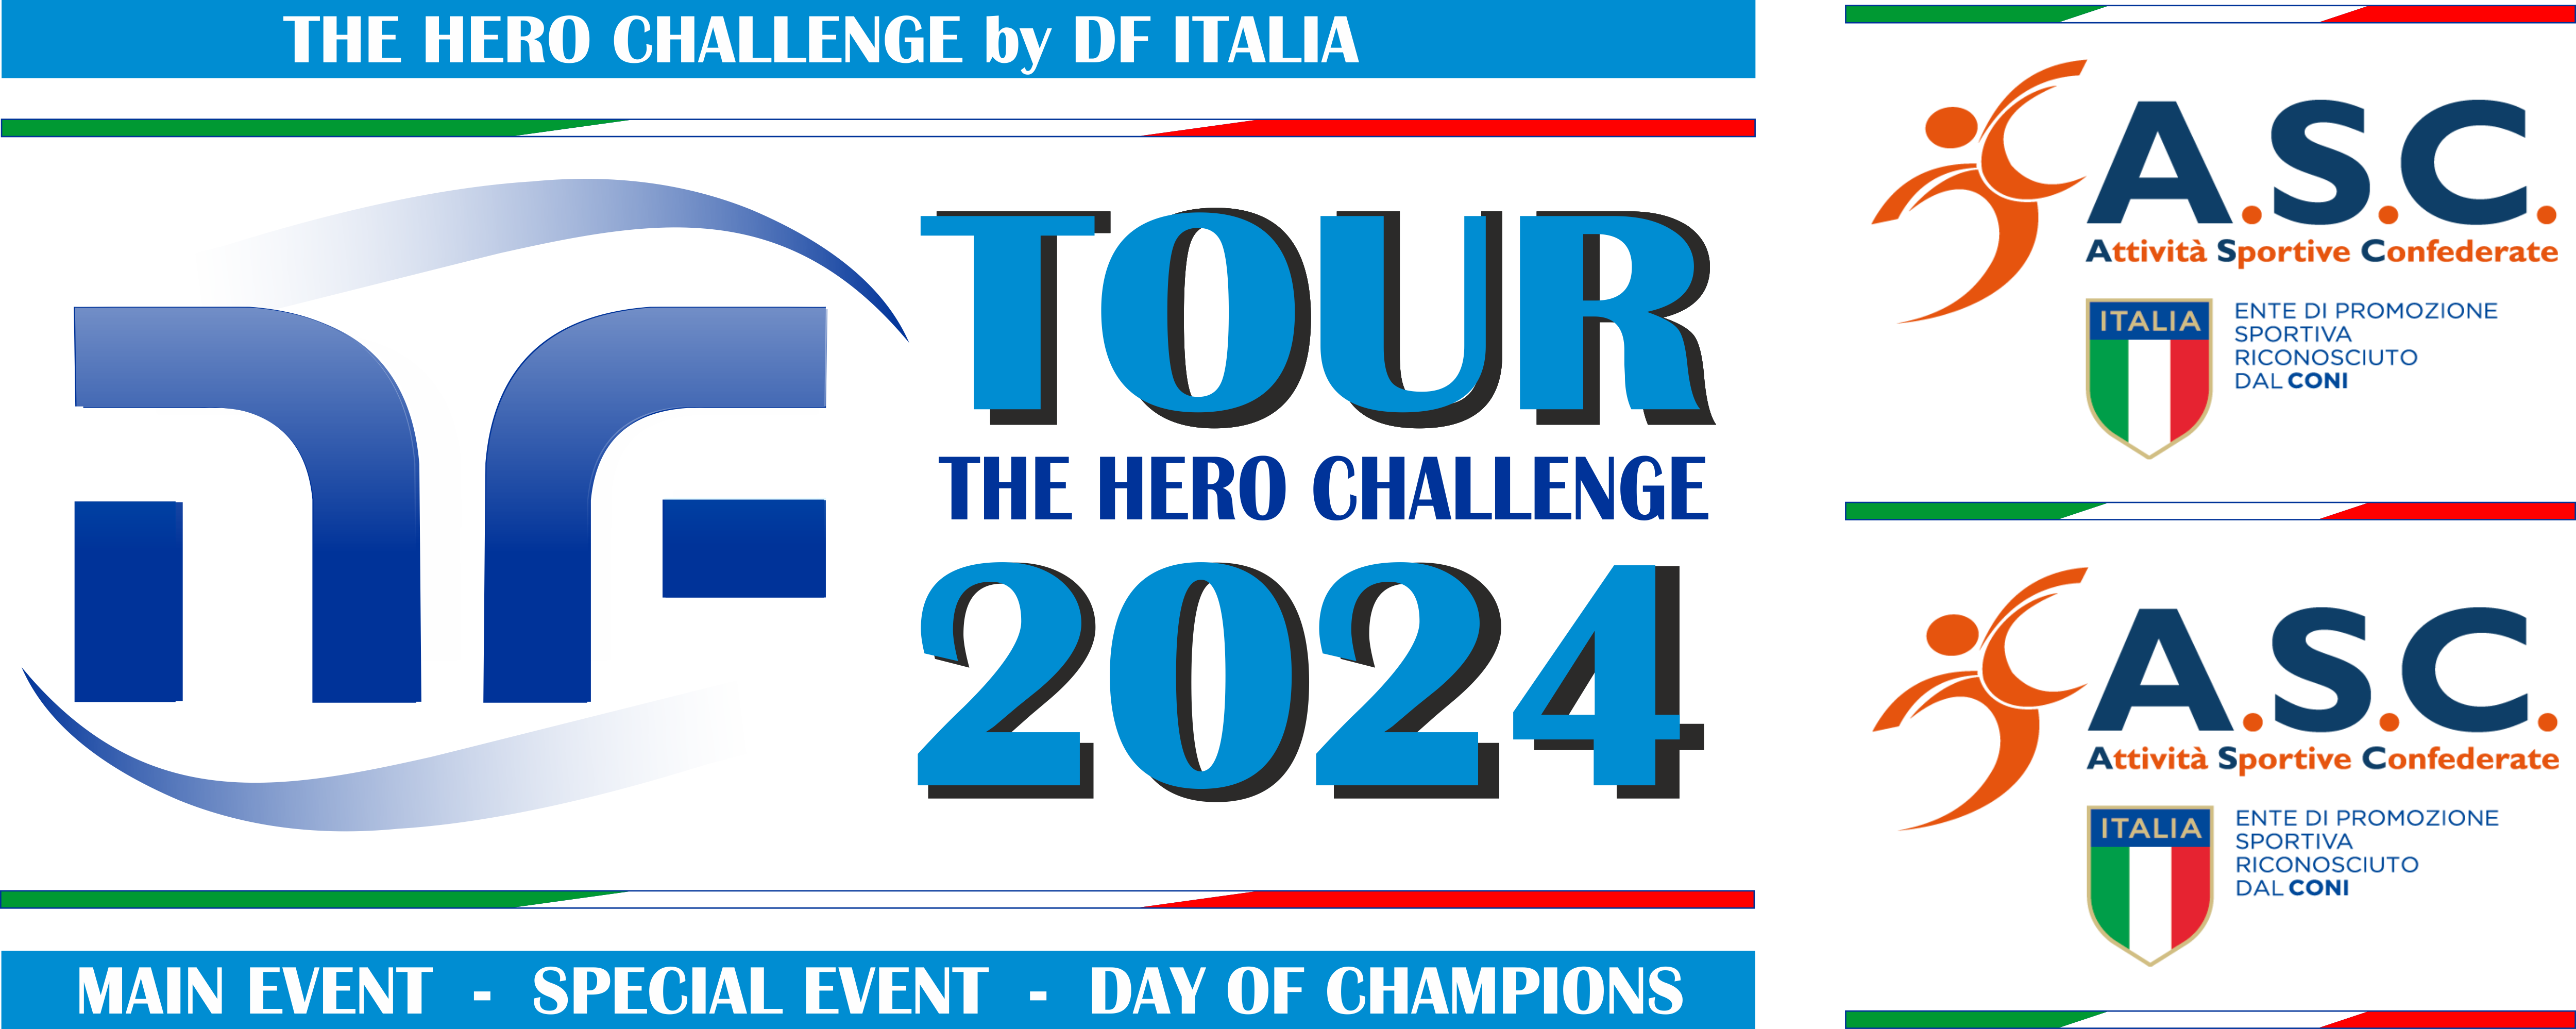 DAY OF CHAMPIONs 2024 by DF TOUR 2024